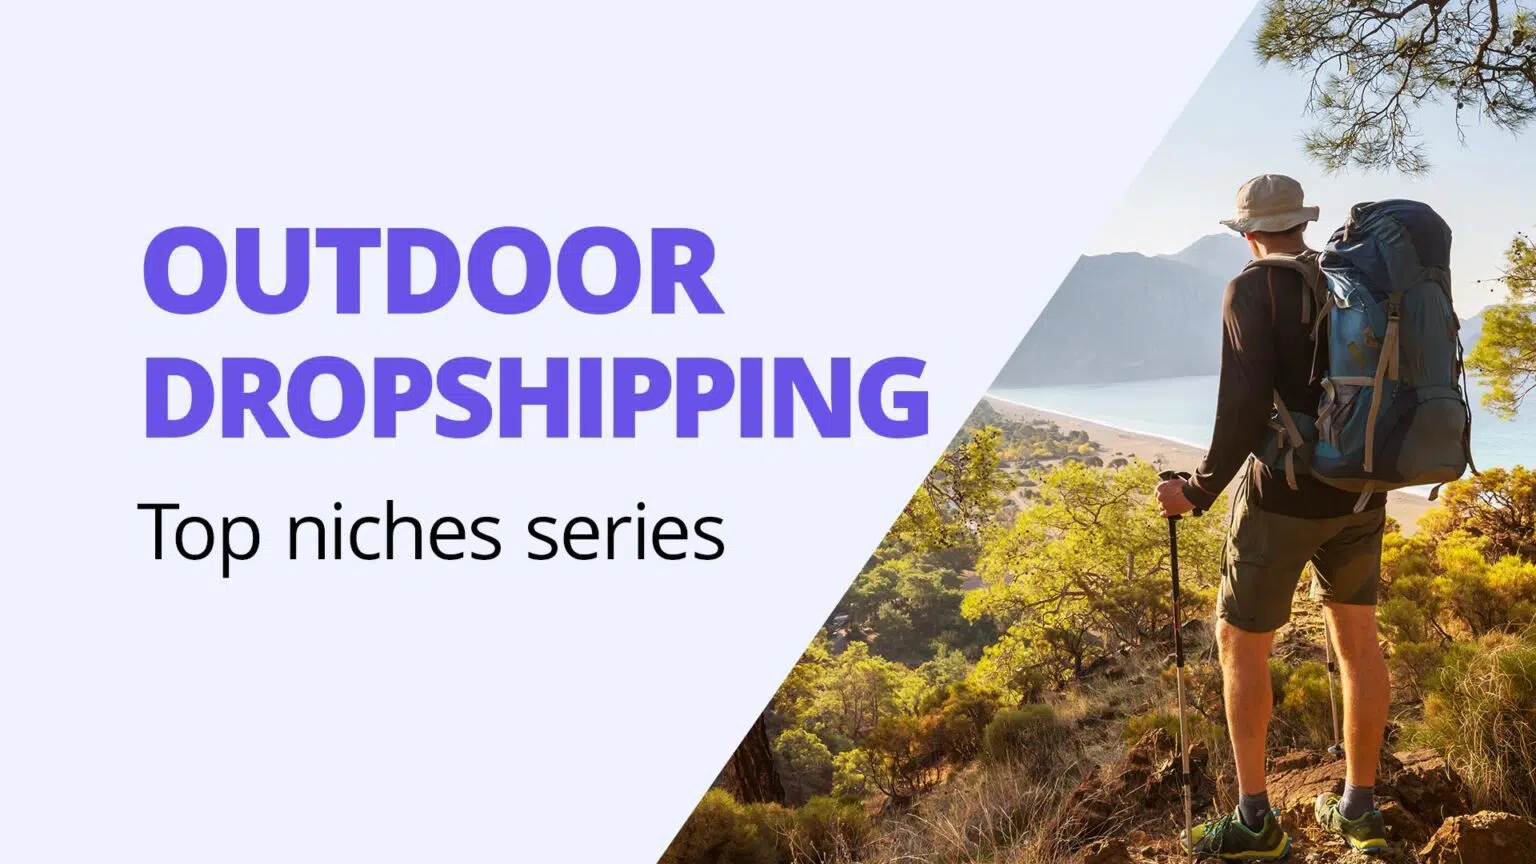 Outdoor dropshipping niche insights -  